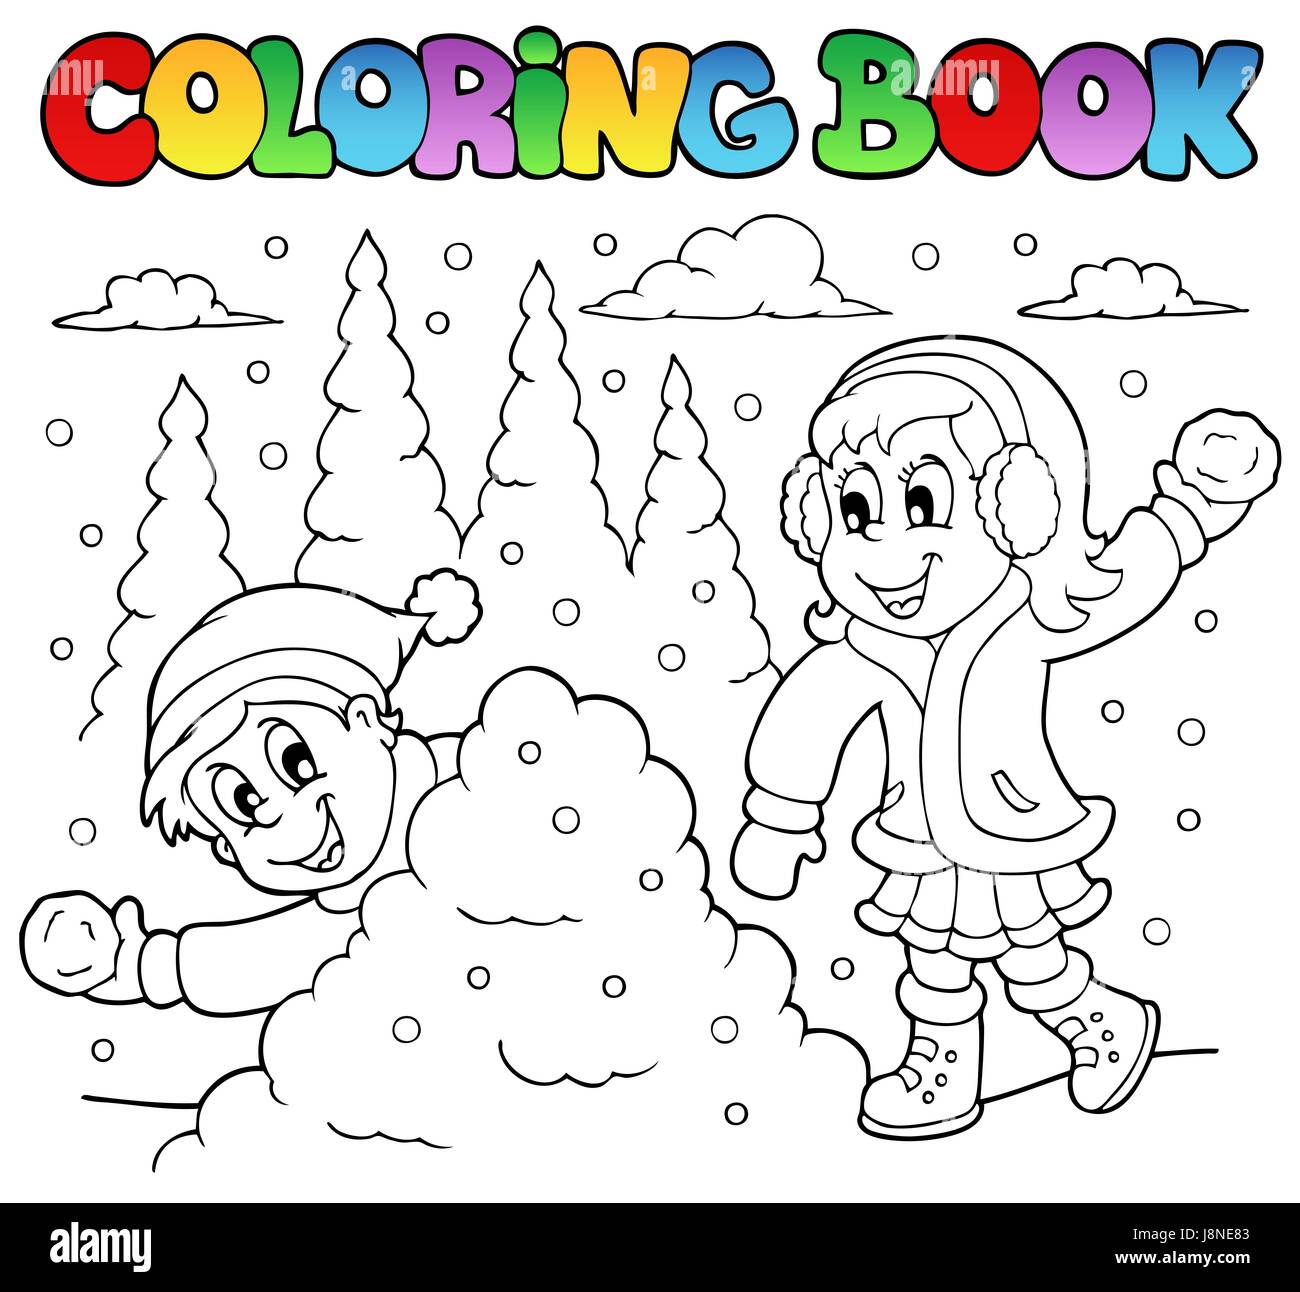 ❄ Christmas Coloring Book Kids ❄ Coloring Book Teens ❄ (Coloring Book Bulk  Kids): ❄ Coloring Book Kid Coloring Book Boy Co (Paperback)